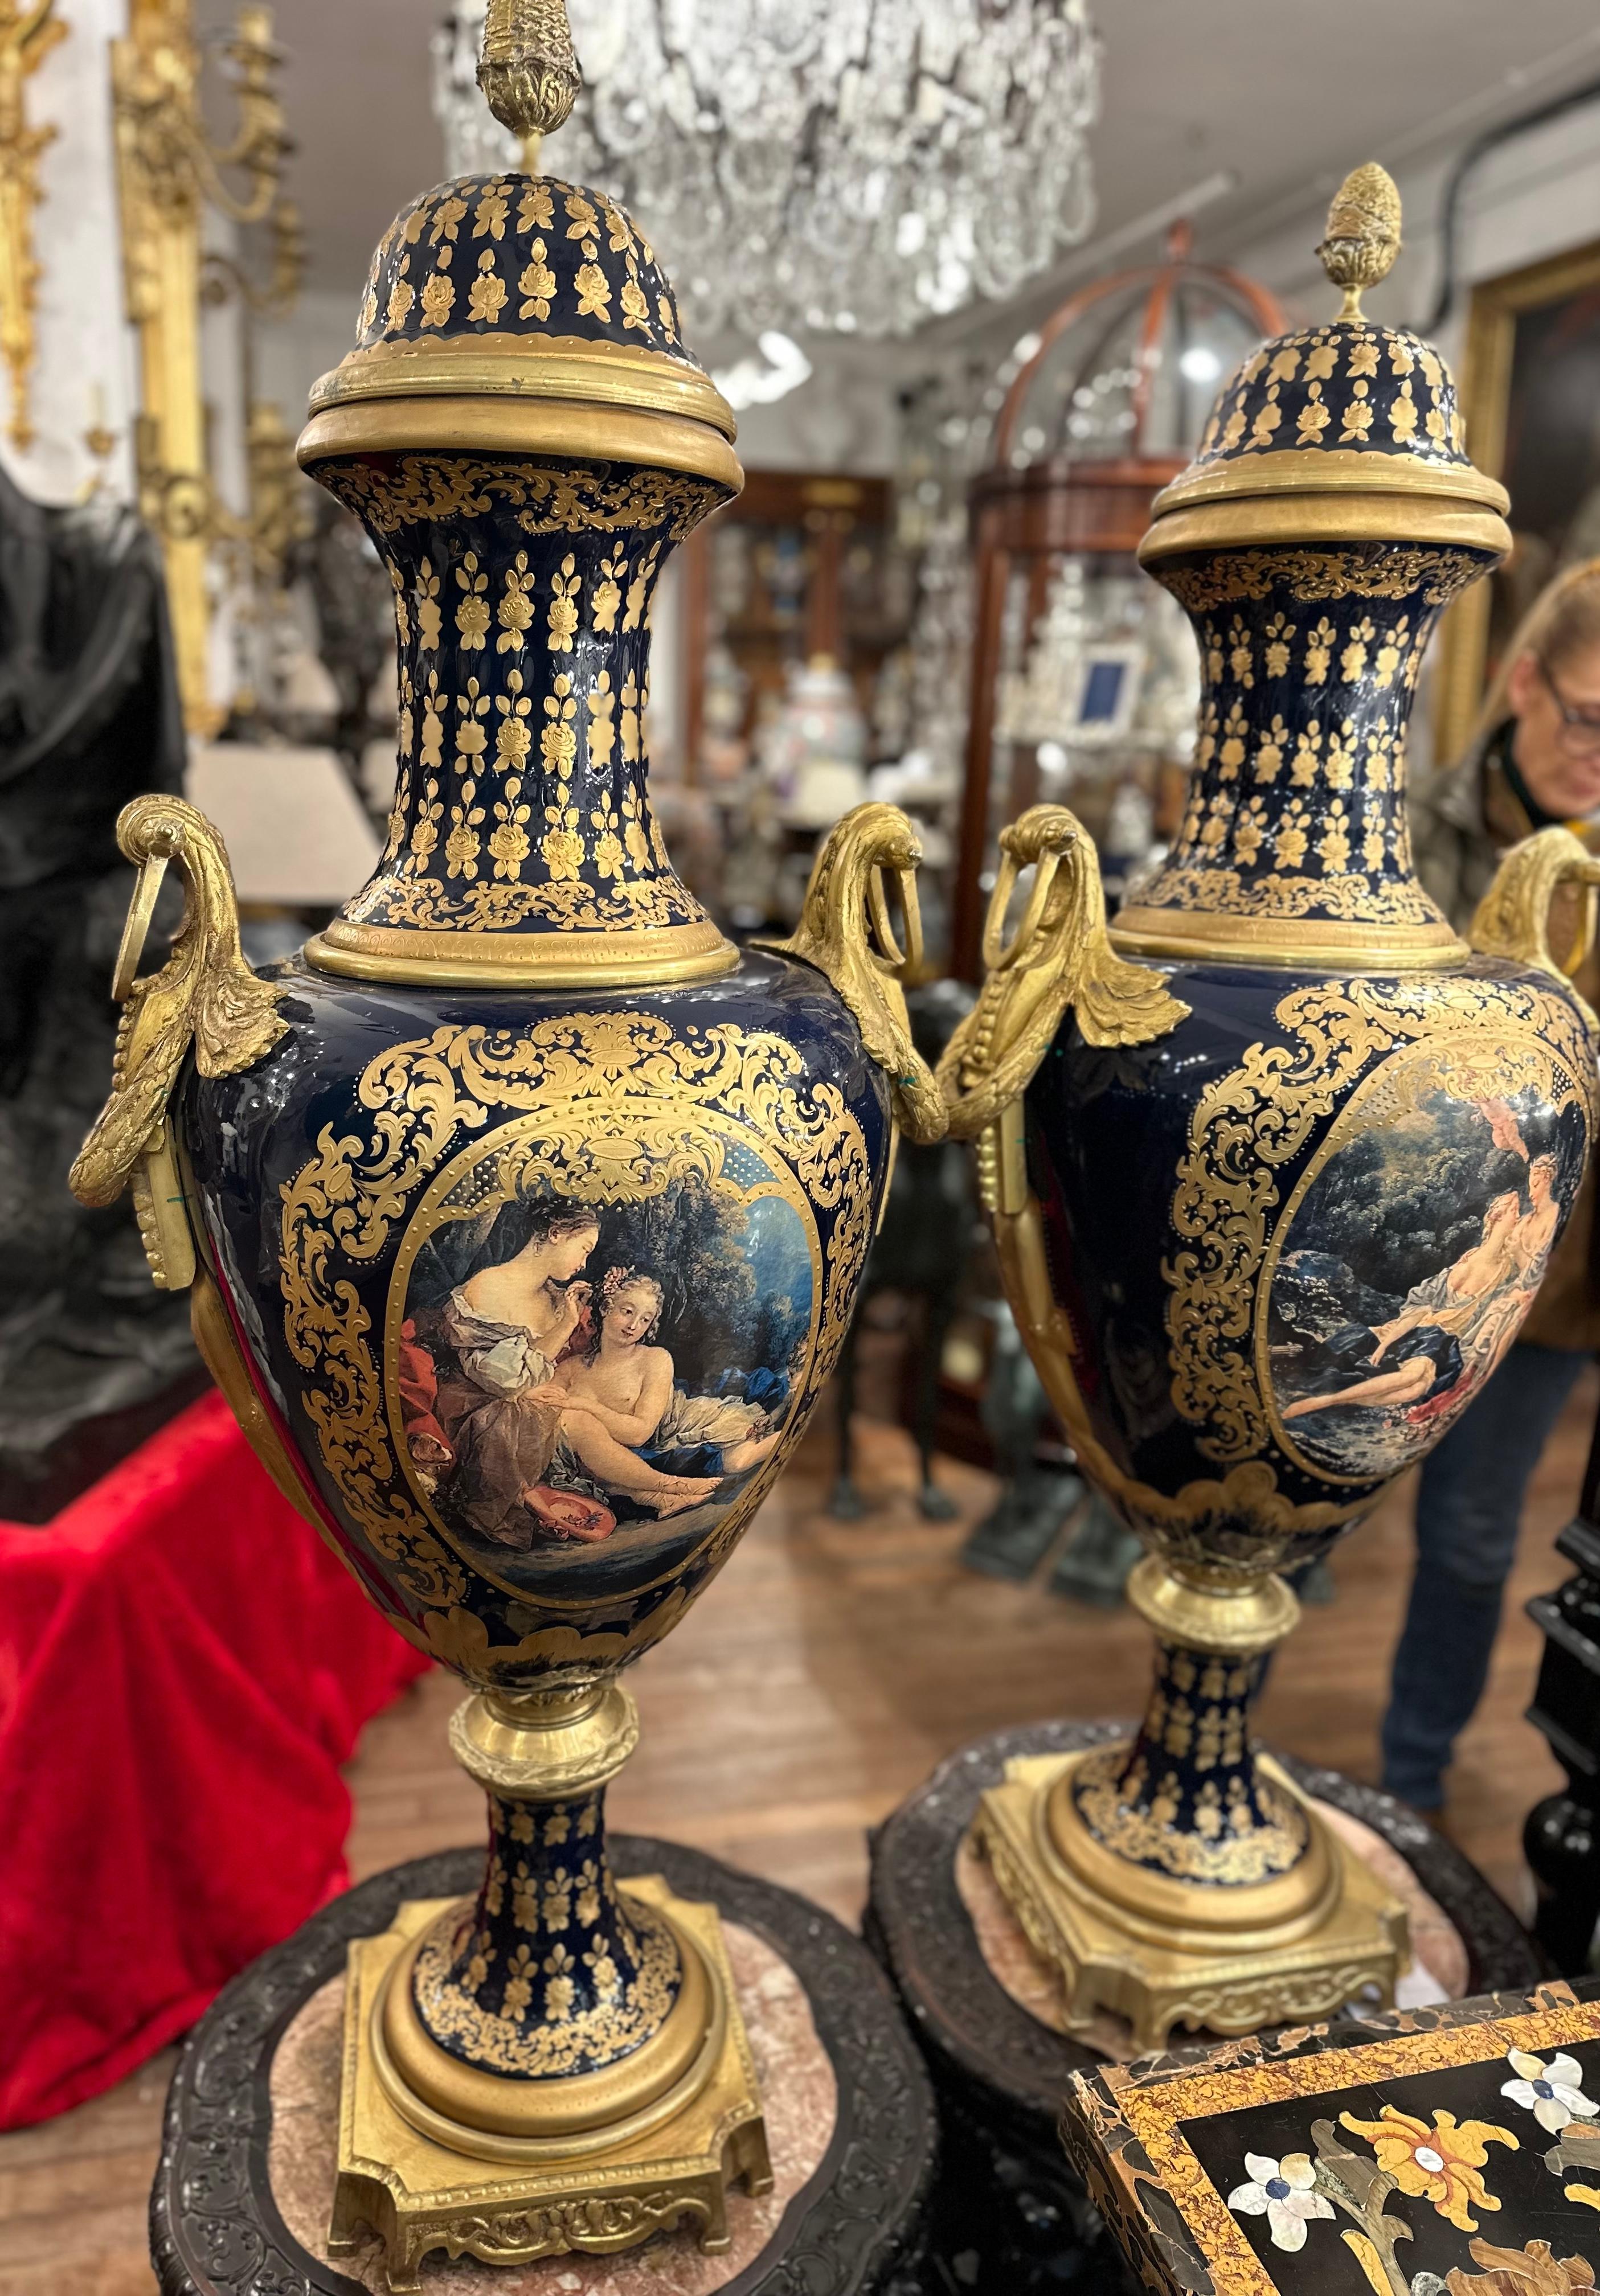 A extremely decorative pair of Sevres style vases in blue and gold. Intricately hand painted in great detail showing reclining figures at leisure in a landscape setting. Idyllic and classically styled the painting of the scene is skilfully depicted